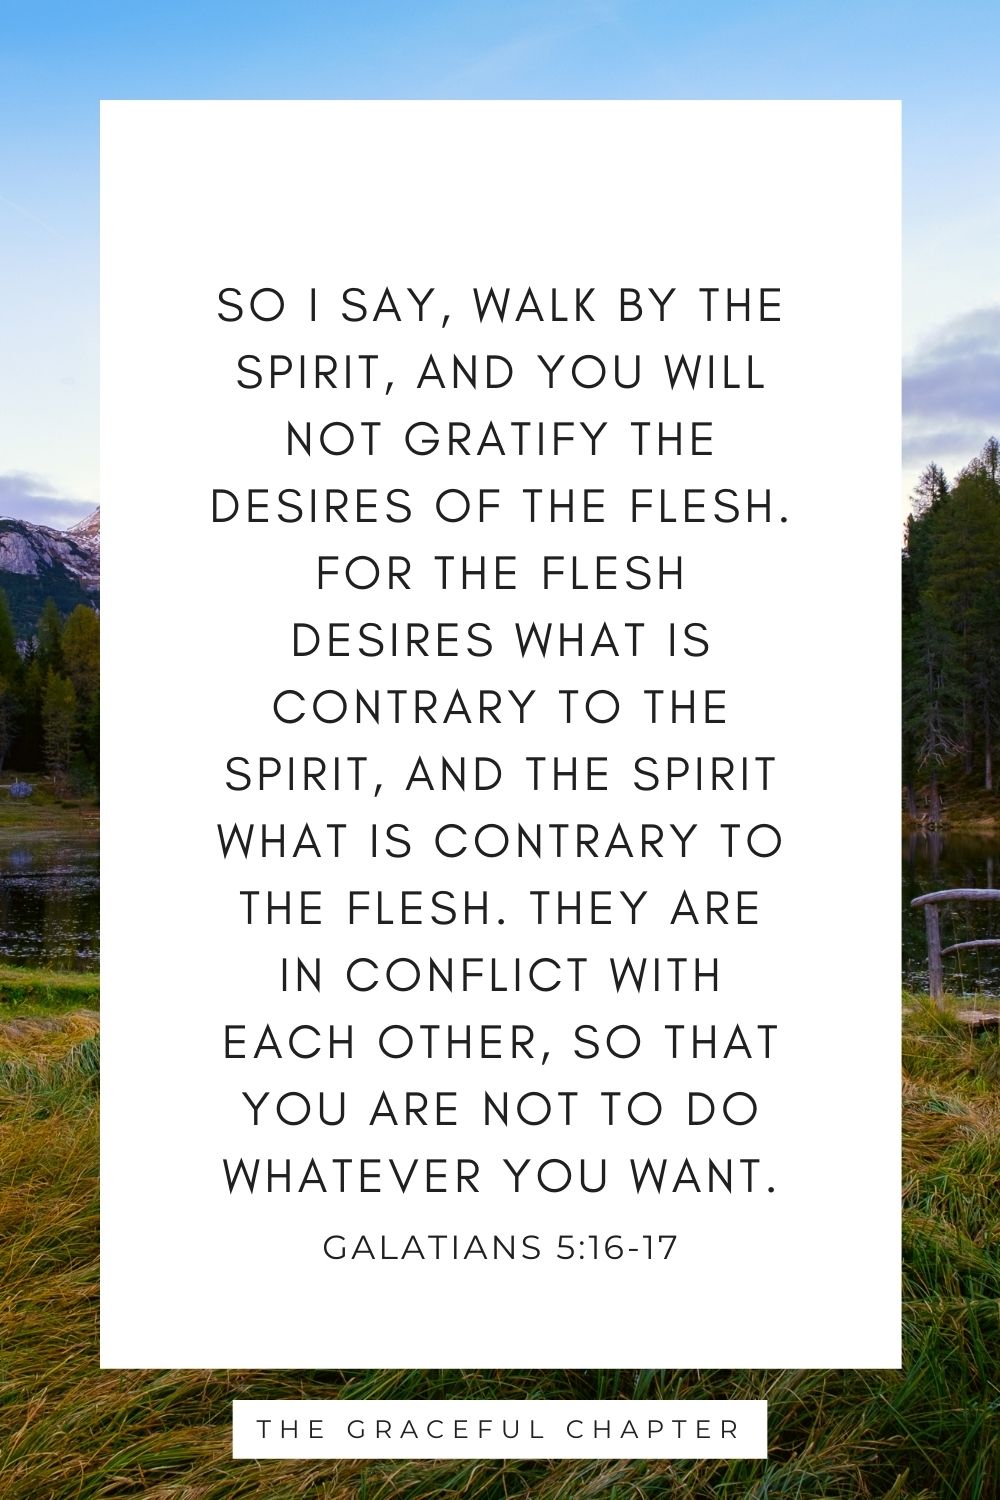 For the flesh desires what is contrary to the Spirit, and the Spirit what is contrary to the flesh. They are in conflict with each other, so that you are not to do whatever you want. Galatians 5:16-17